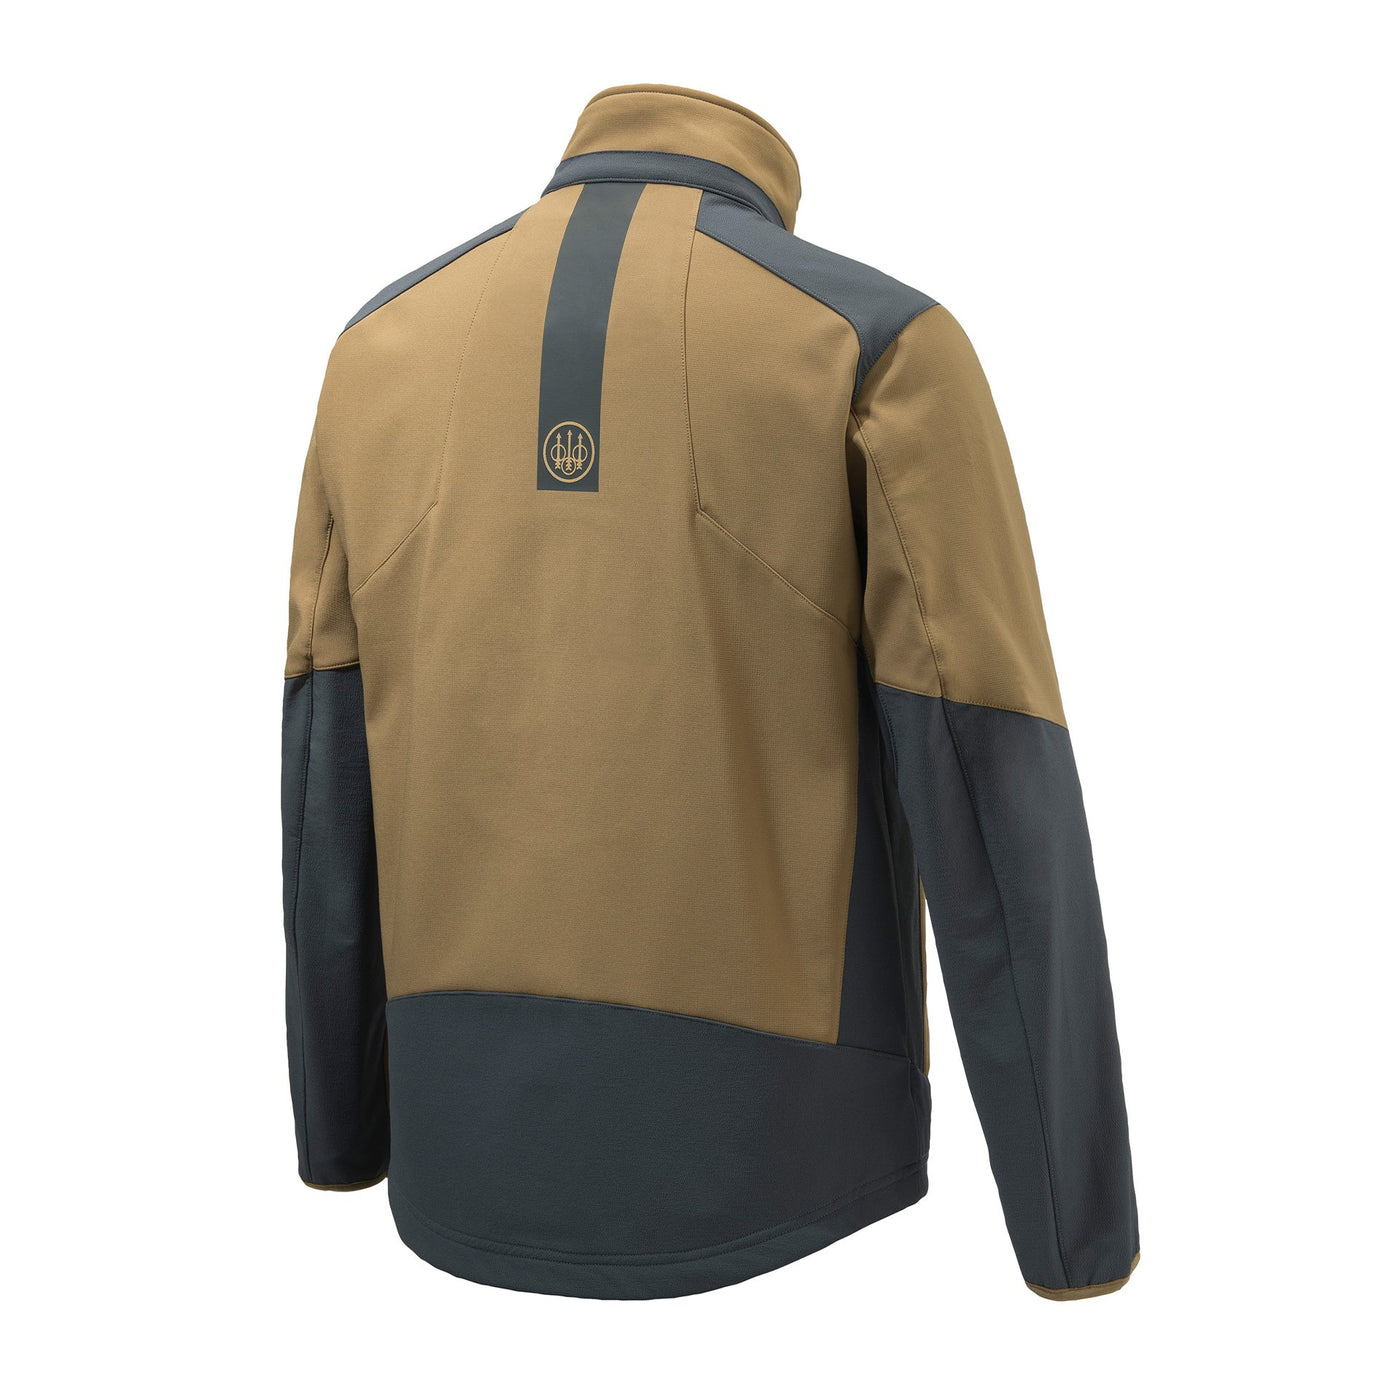 Butte Softshell Jacket